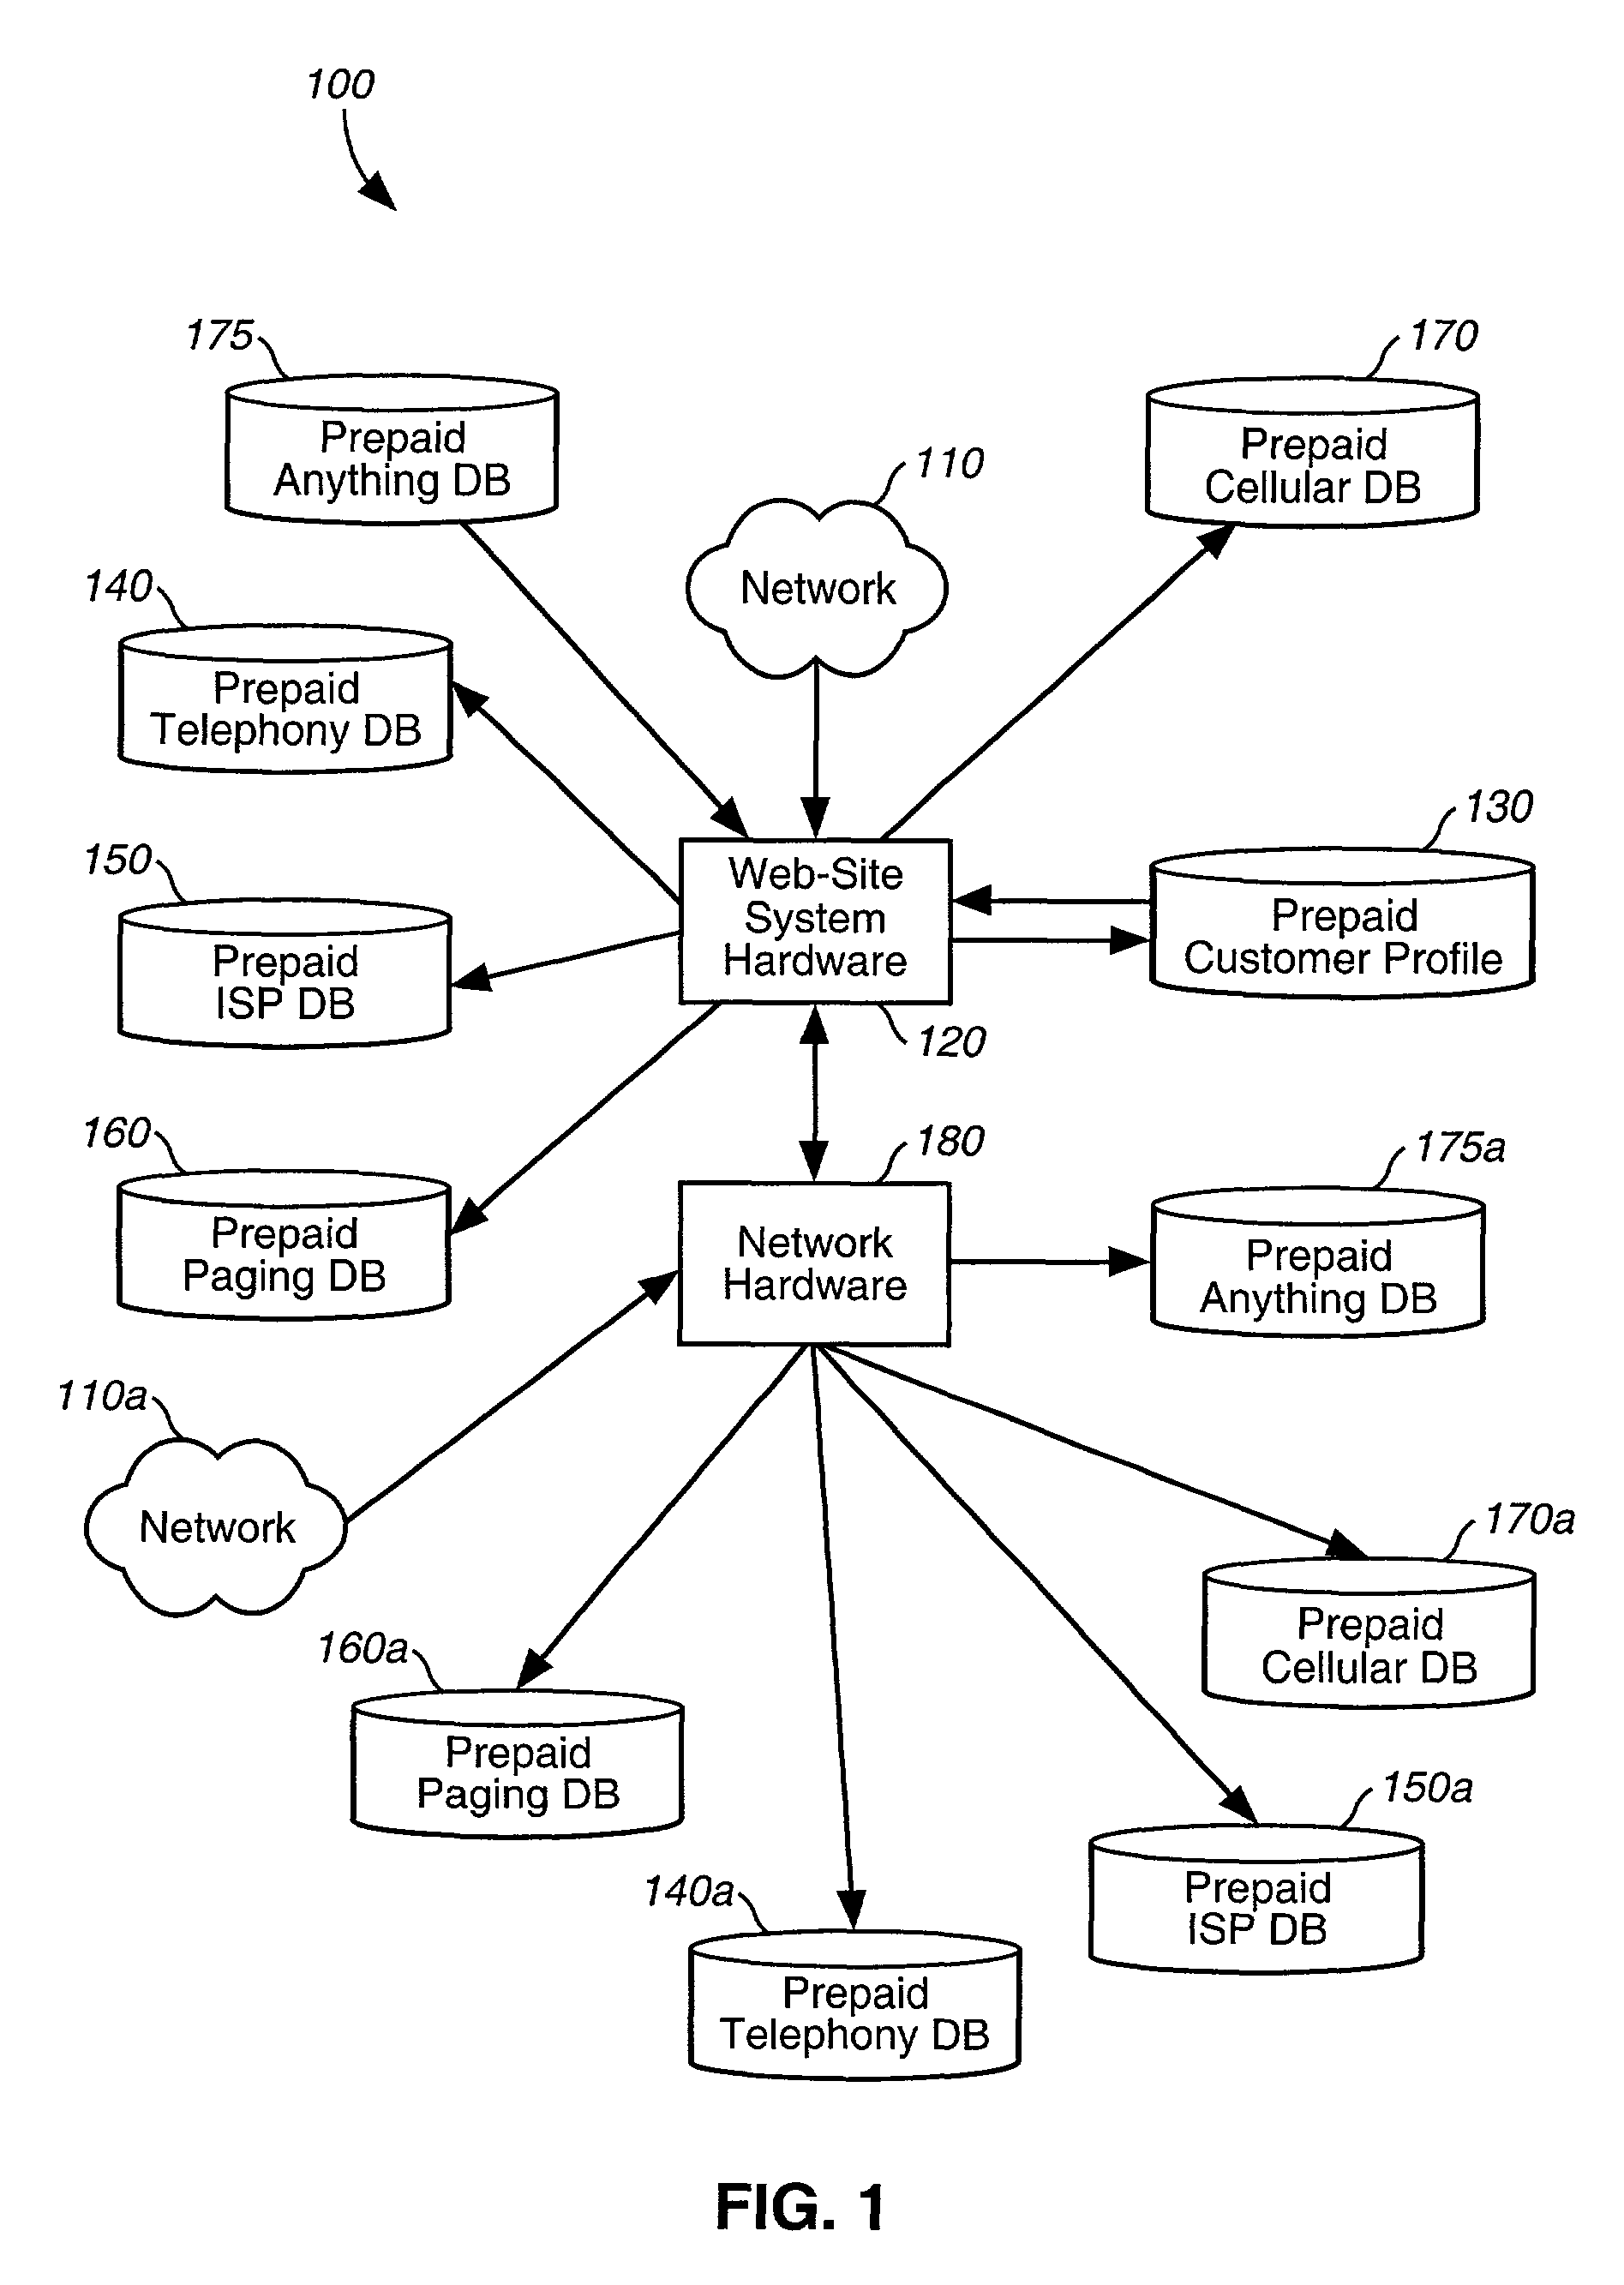 System and method for providing prepaid services via an internet protocol network system